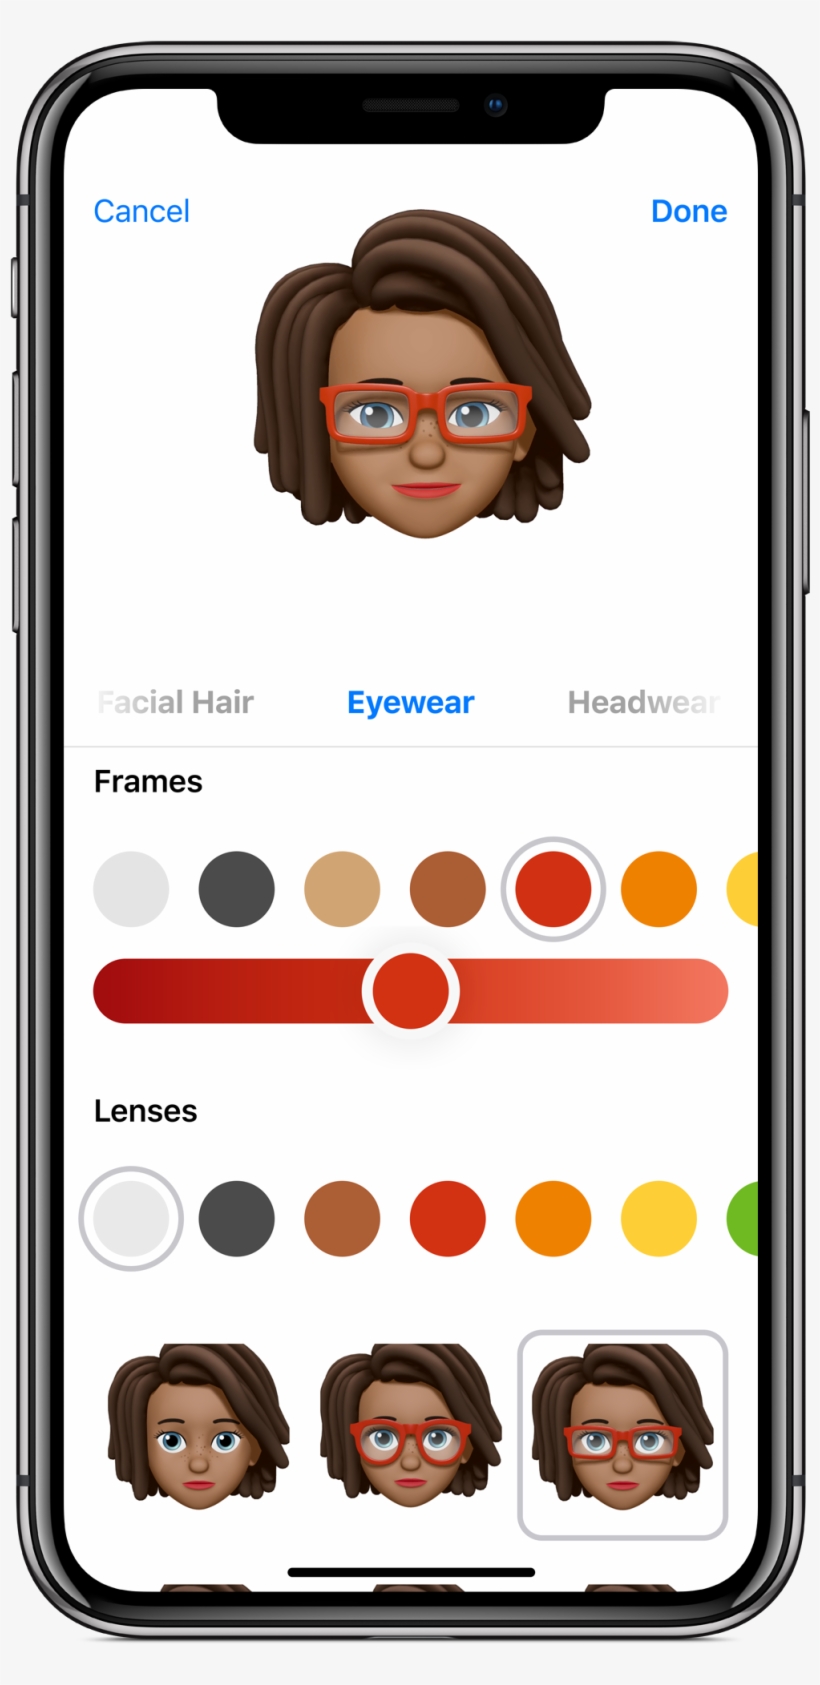 The New Animoji And Memoji Have Split Opinion - New Emojis In Ios 12.1, transparent png #7966332